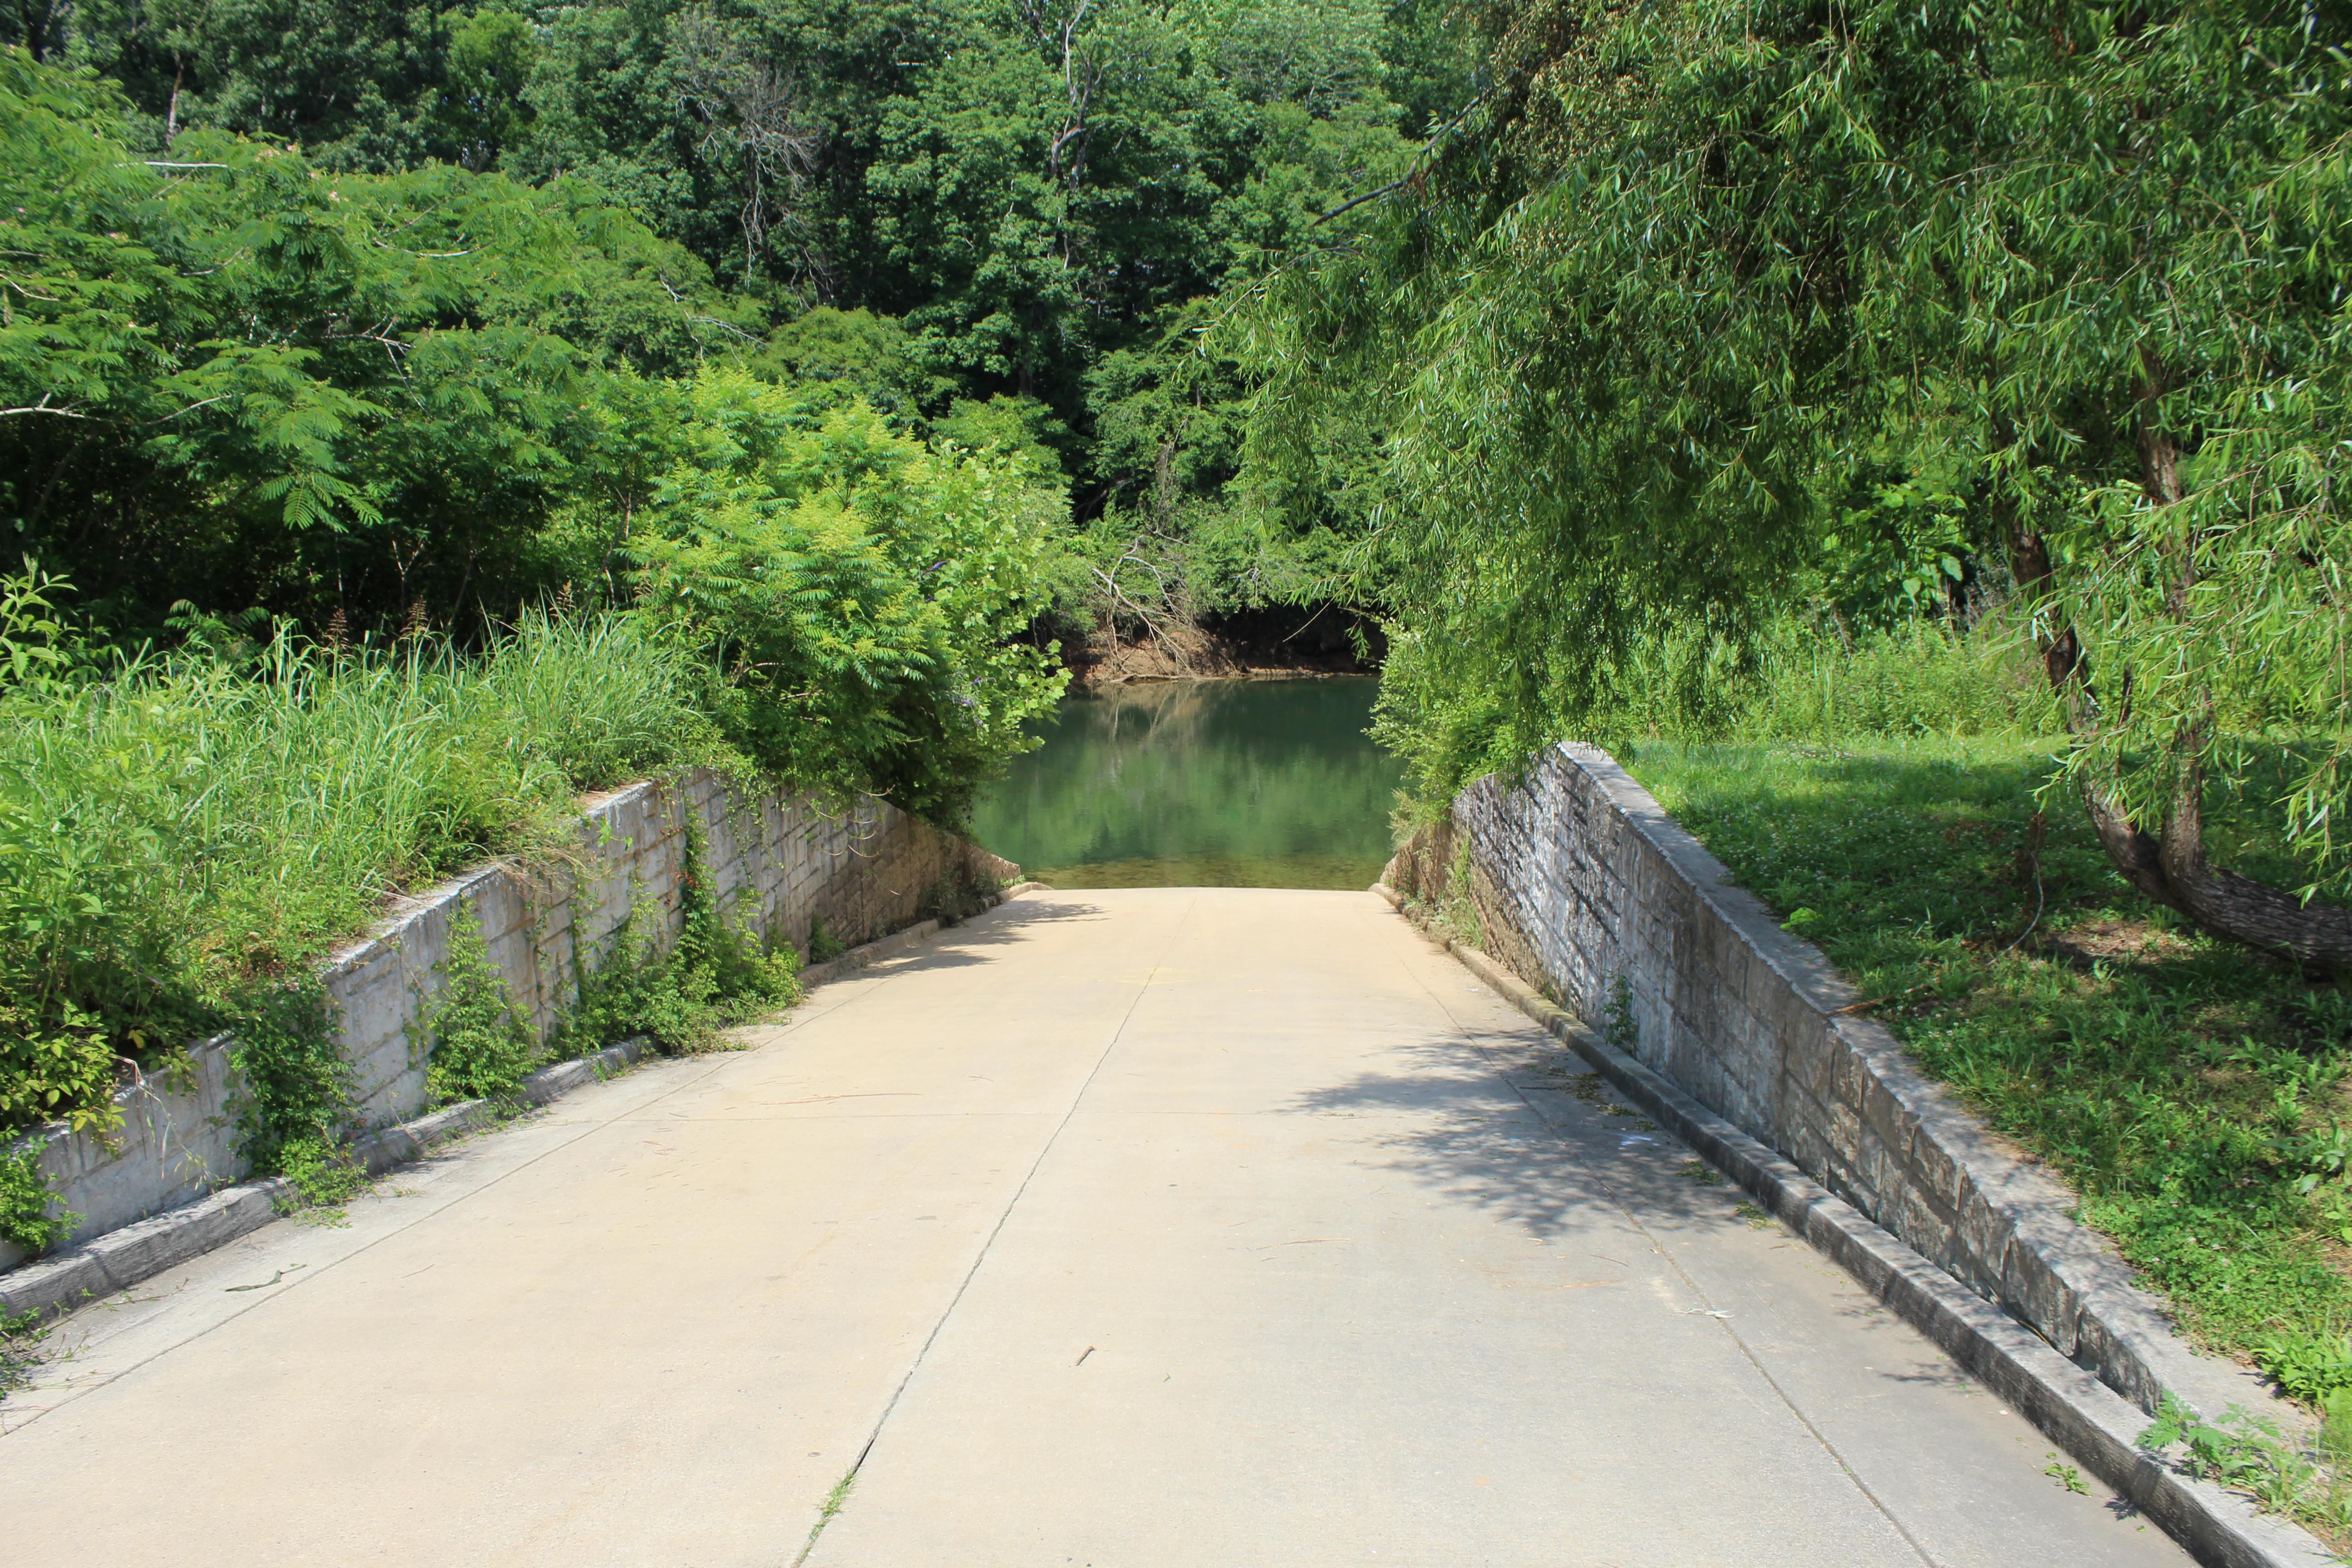 Looking down boat ramp with retaining walls on both sides and trees on the other side of the river.